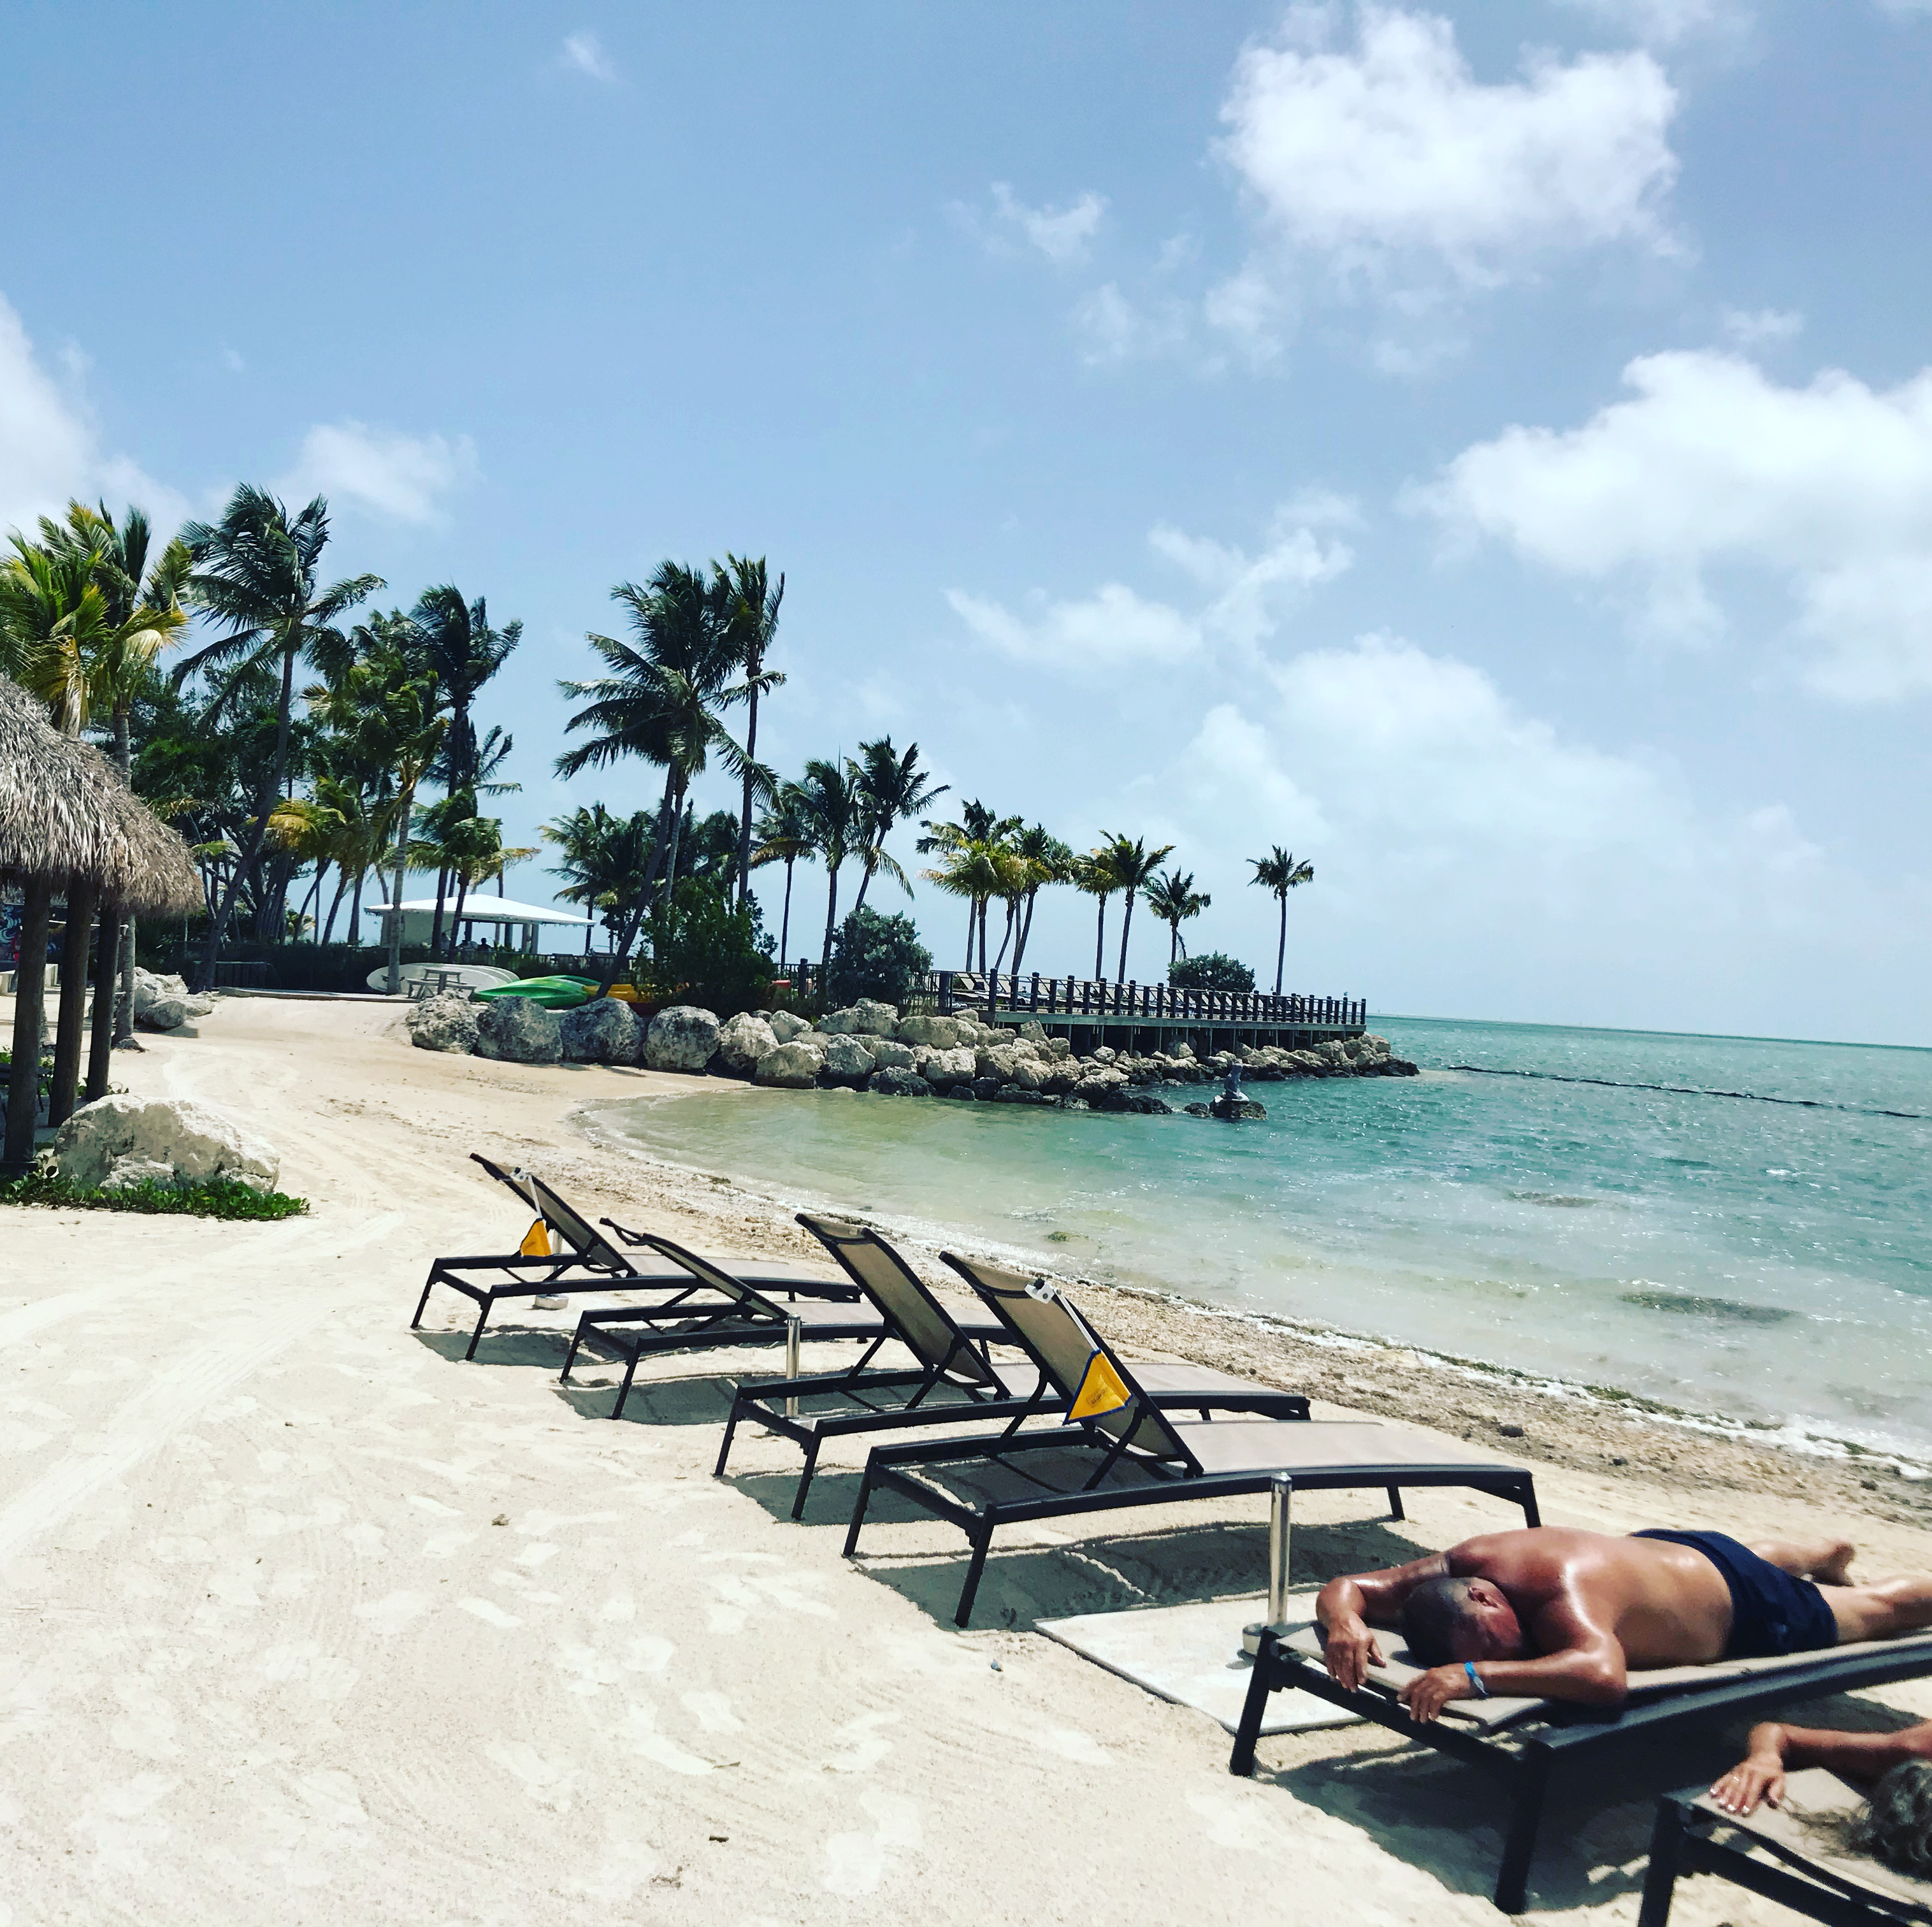 Sunbathing by the white sandy shores at a resort in Islamarodo, Florida Keys with palm trees swaying in the breeze.